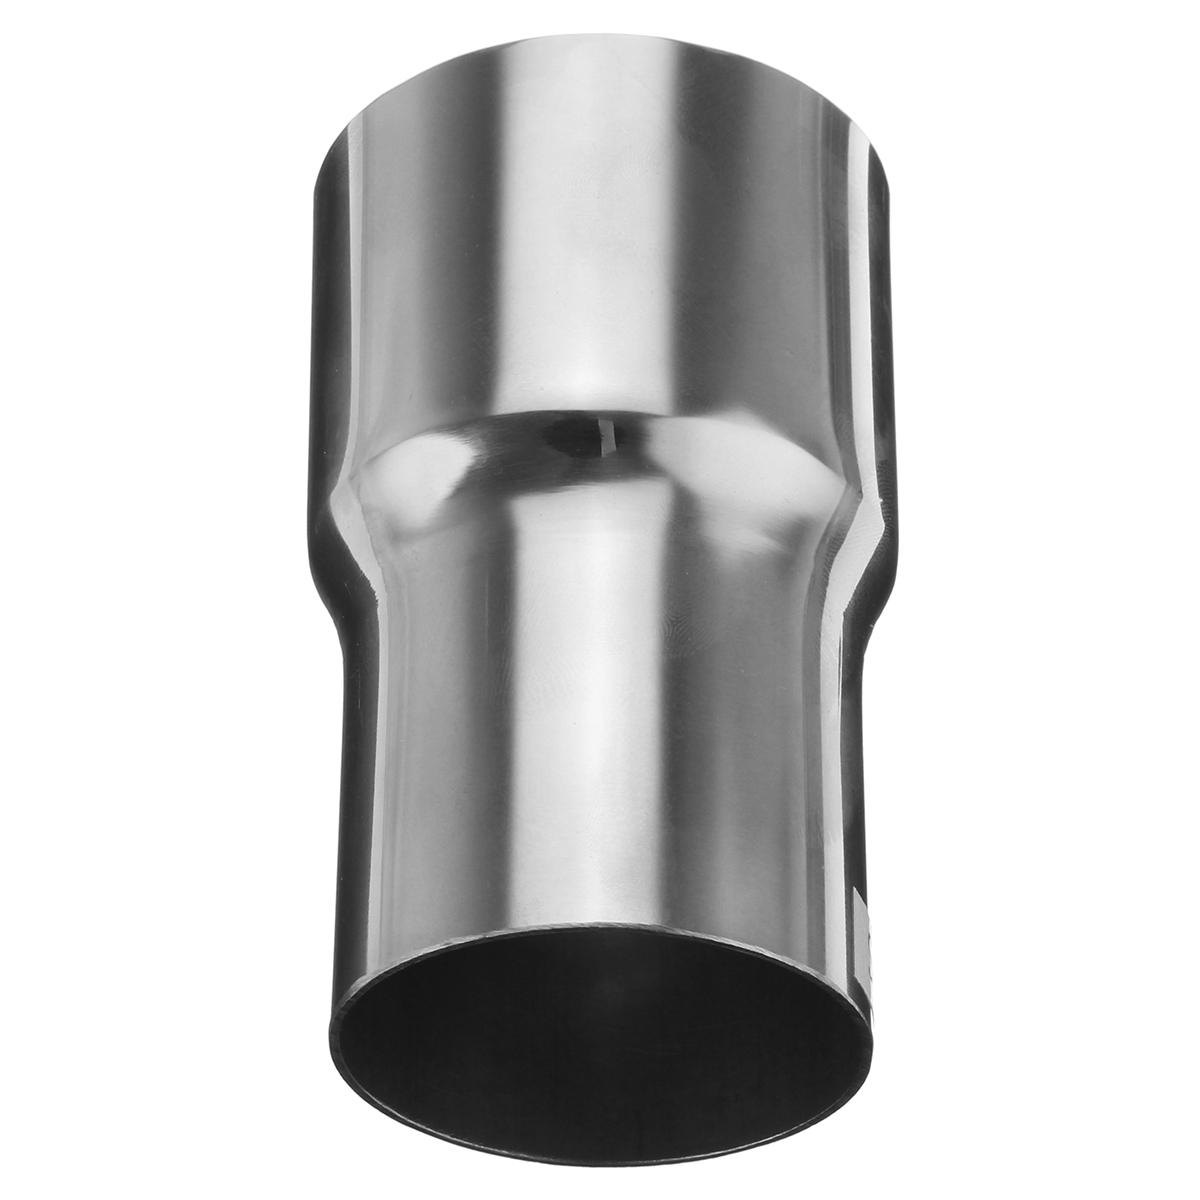 60mm To 51mm Mild Steel Standard Adapter Exhaust Reducer Connector Pipe Tube